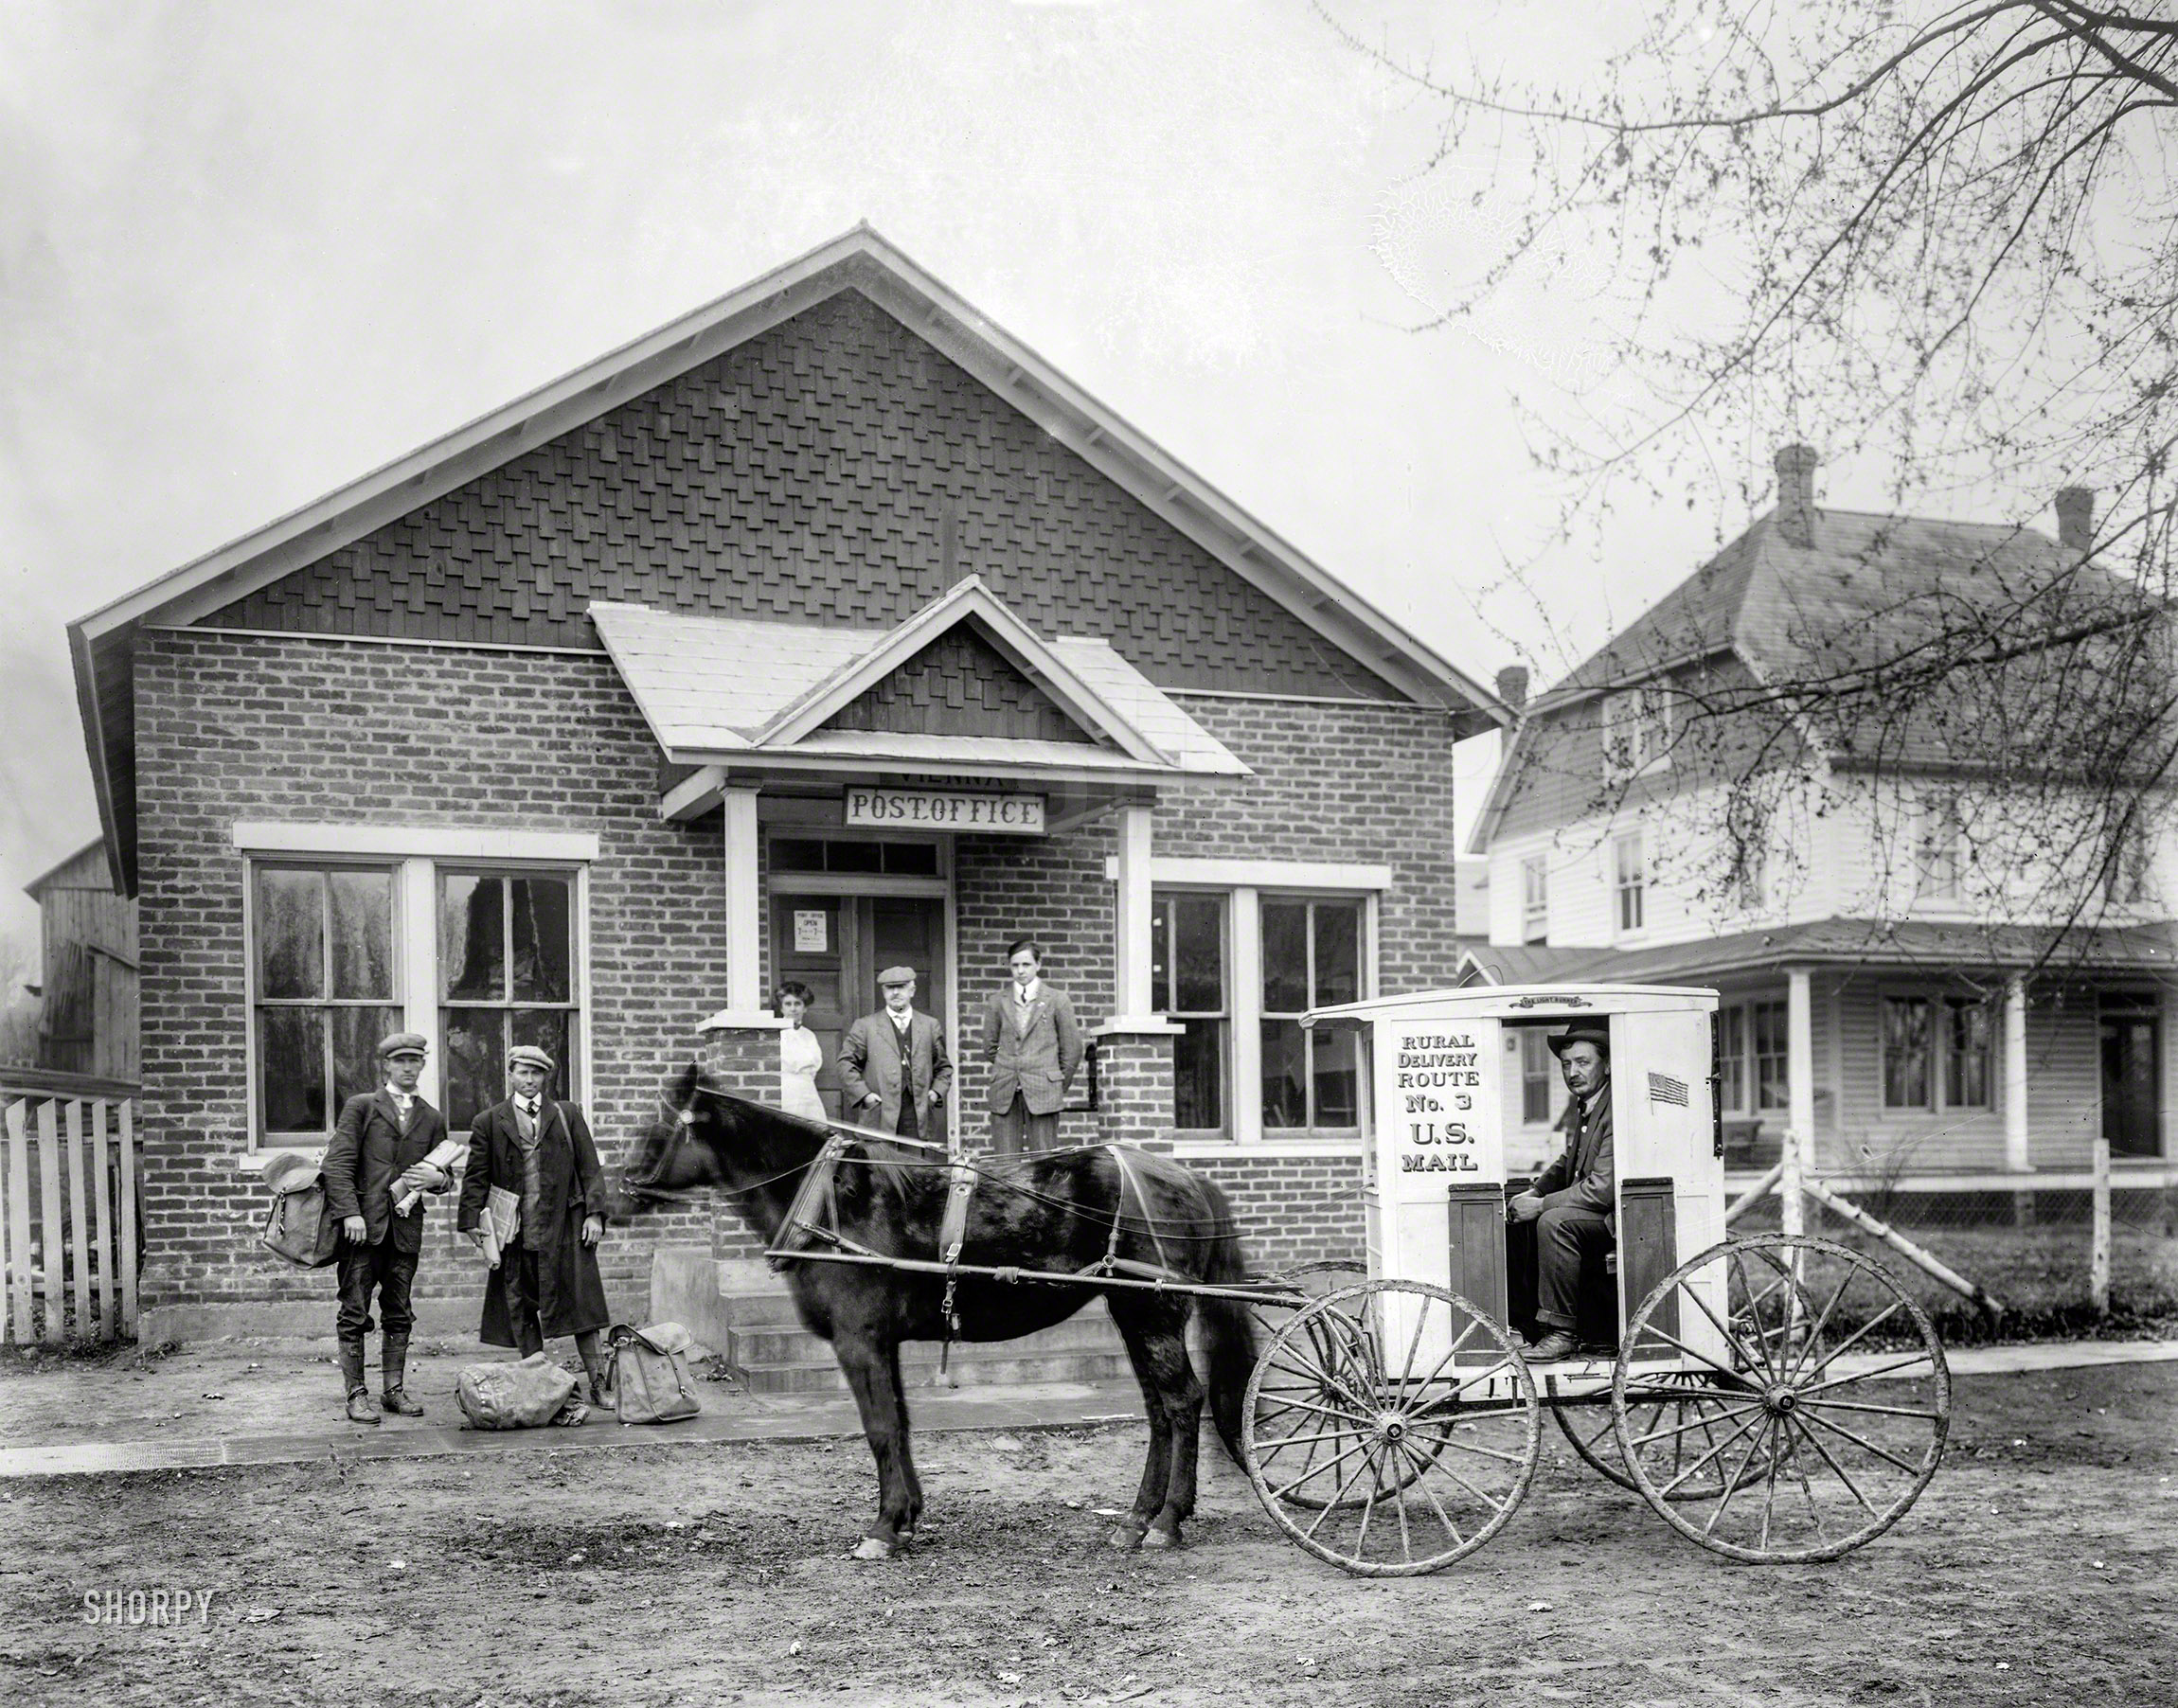 Fairfax County, Virginia, circa 1910. "Vienna P.O." Our title comes from the name of the delivery wagon. 8x10 inch glass negative. View full size.